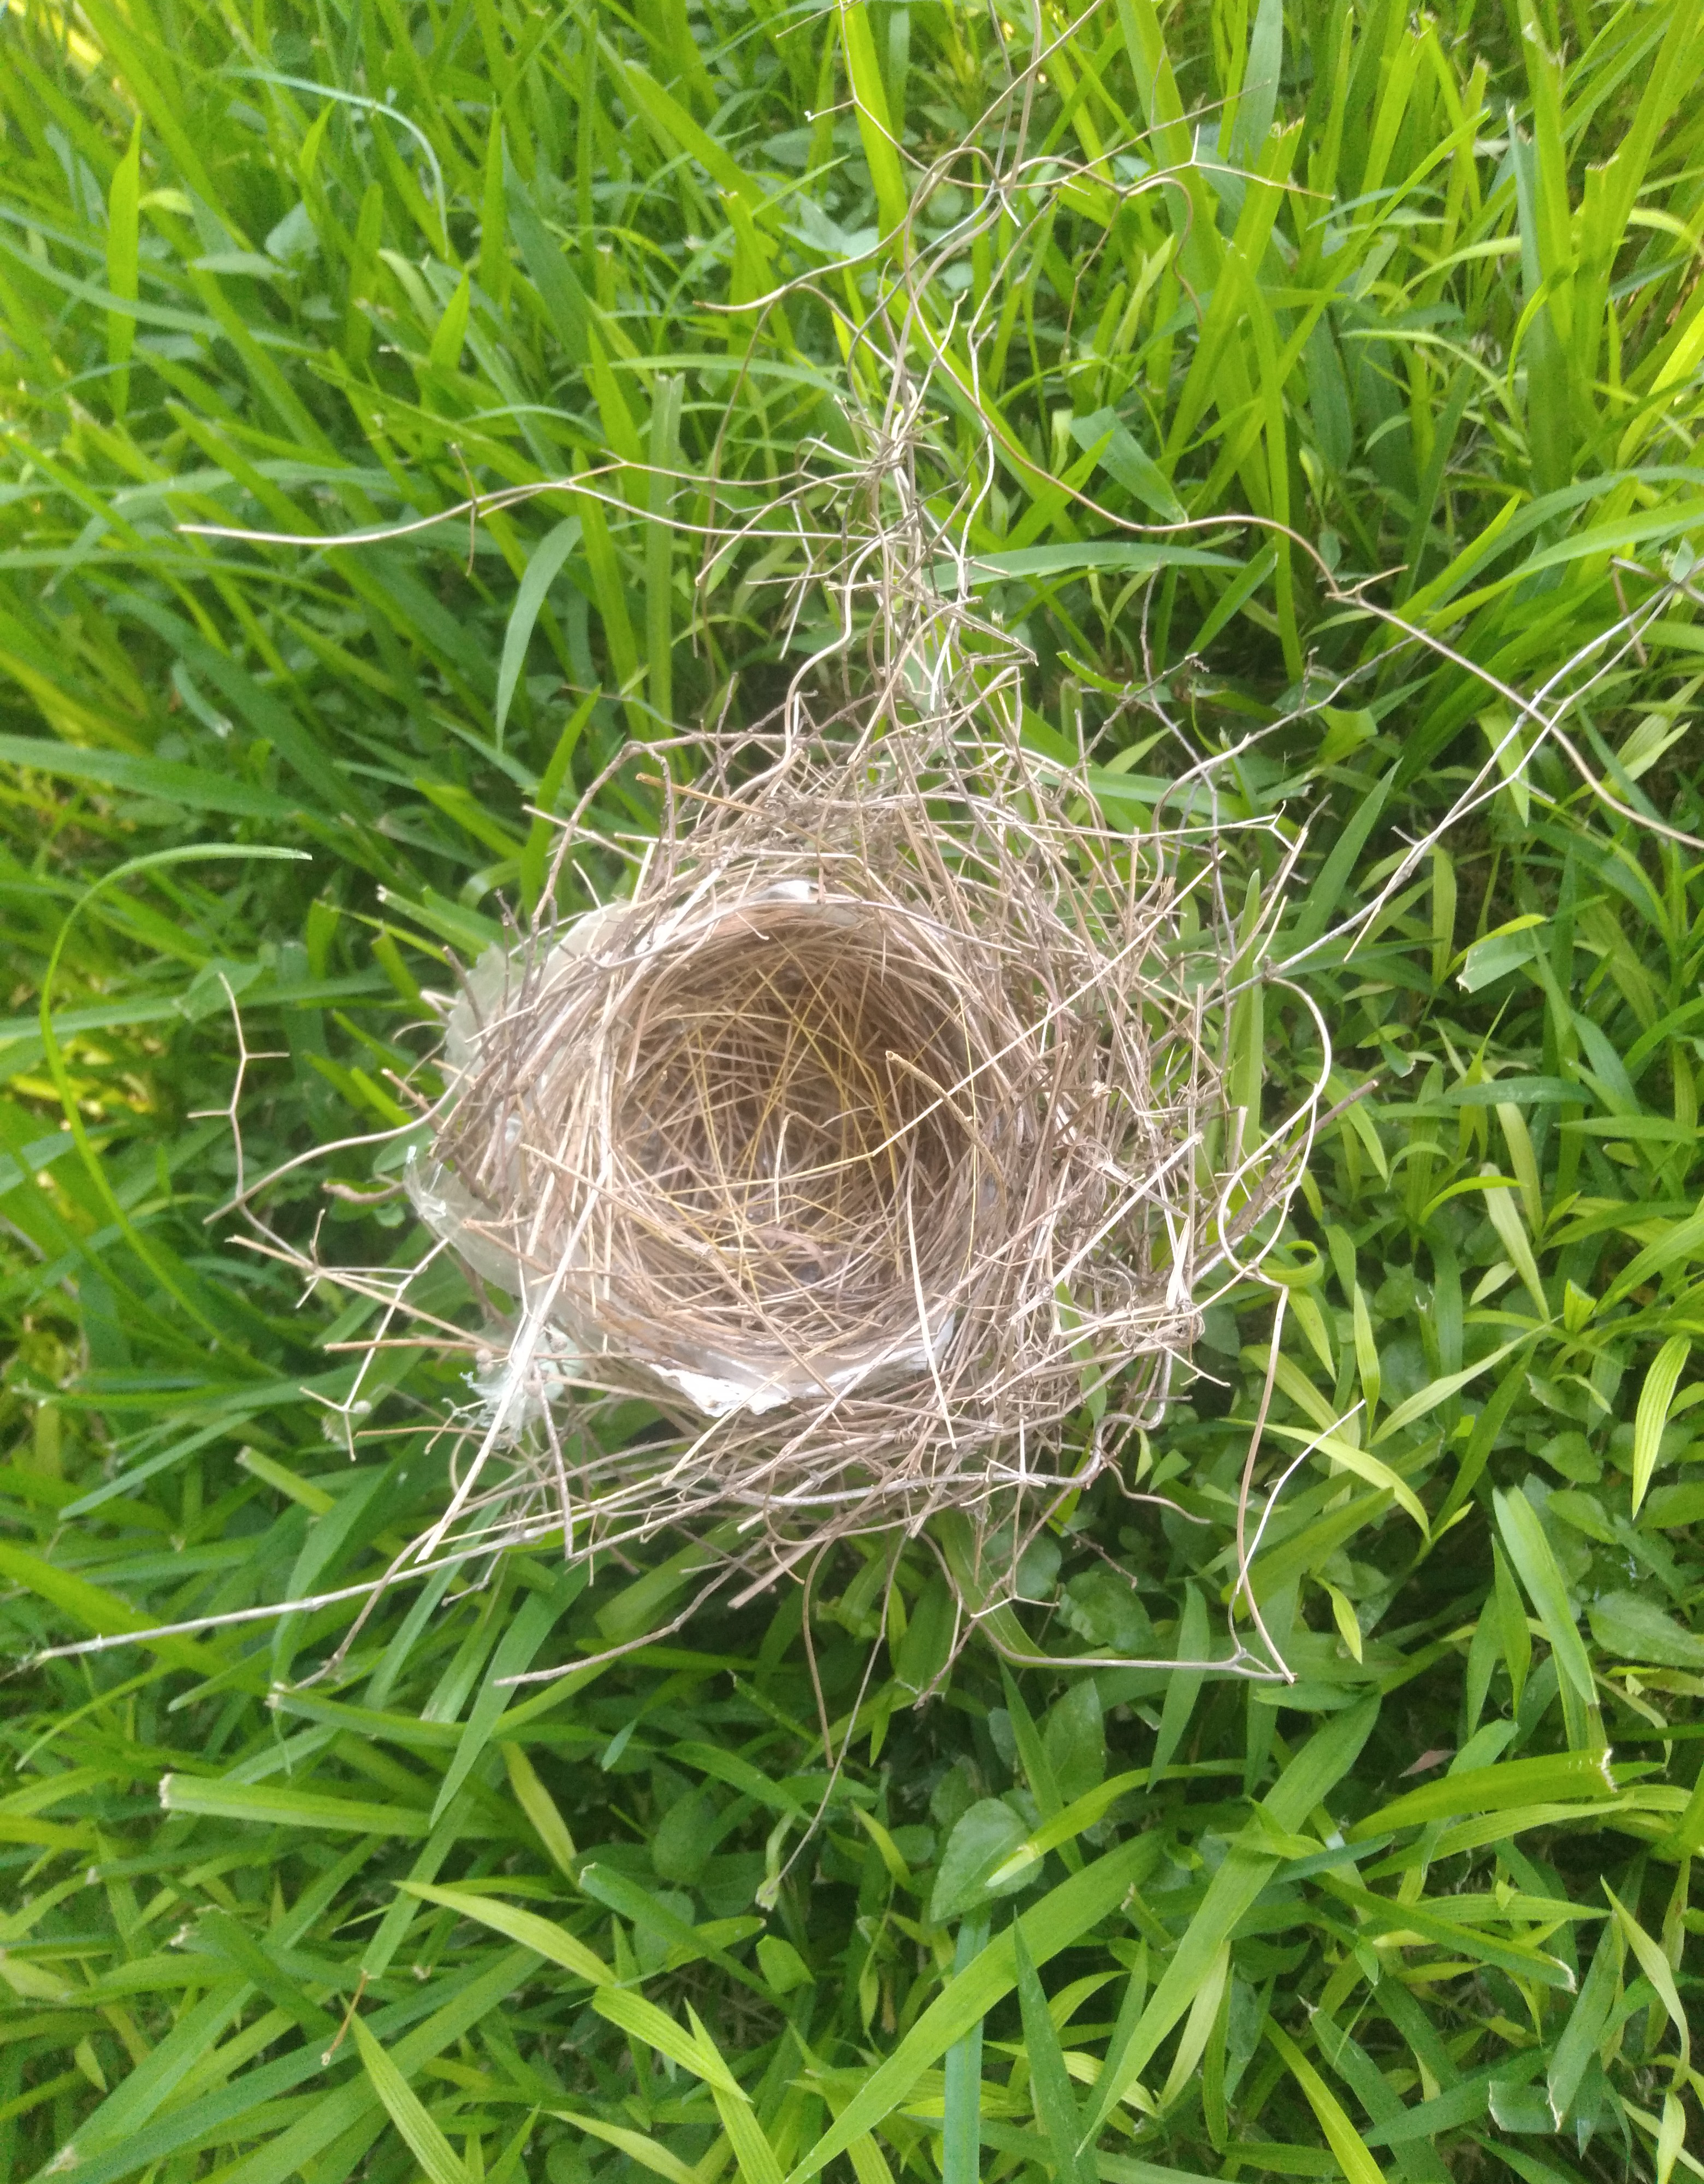 birds nest made partly of tape